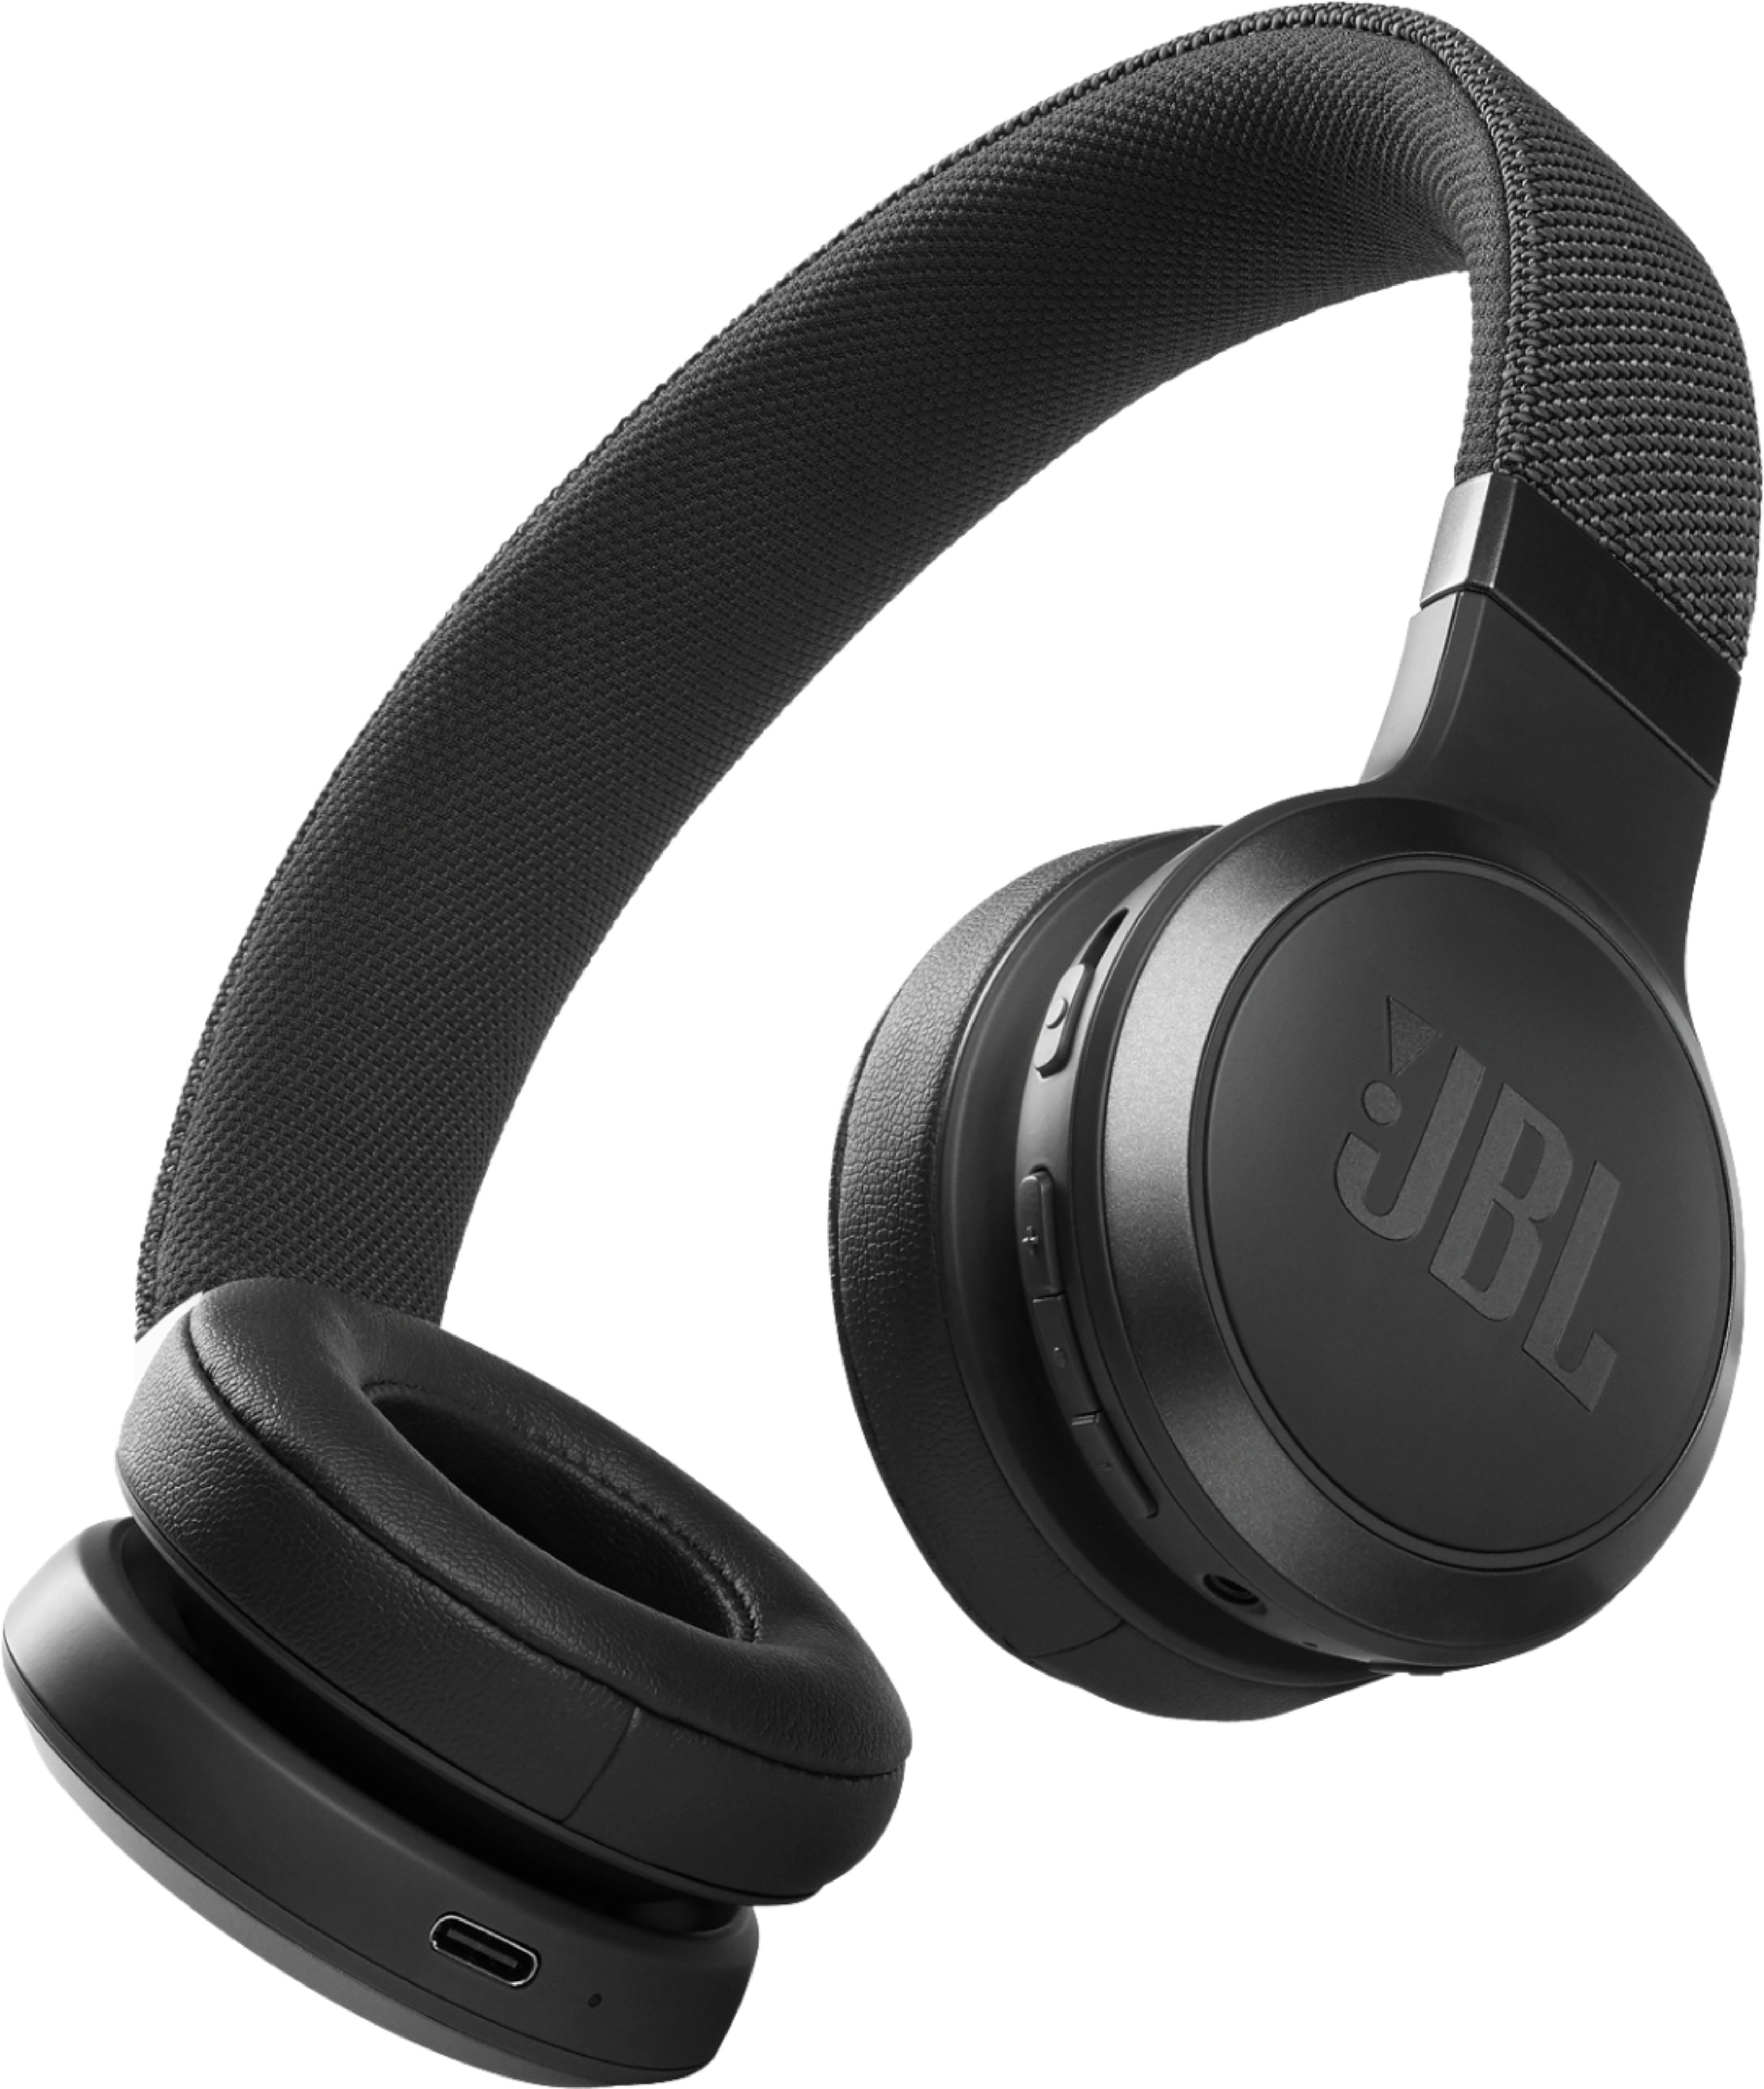 Angle View: JBL - Live460NC Wireless Noise Cancelling On-Ear Headphones - Black